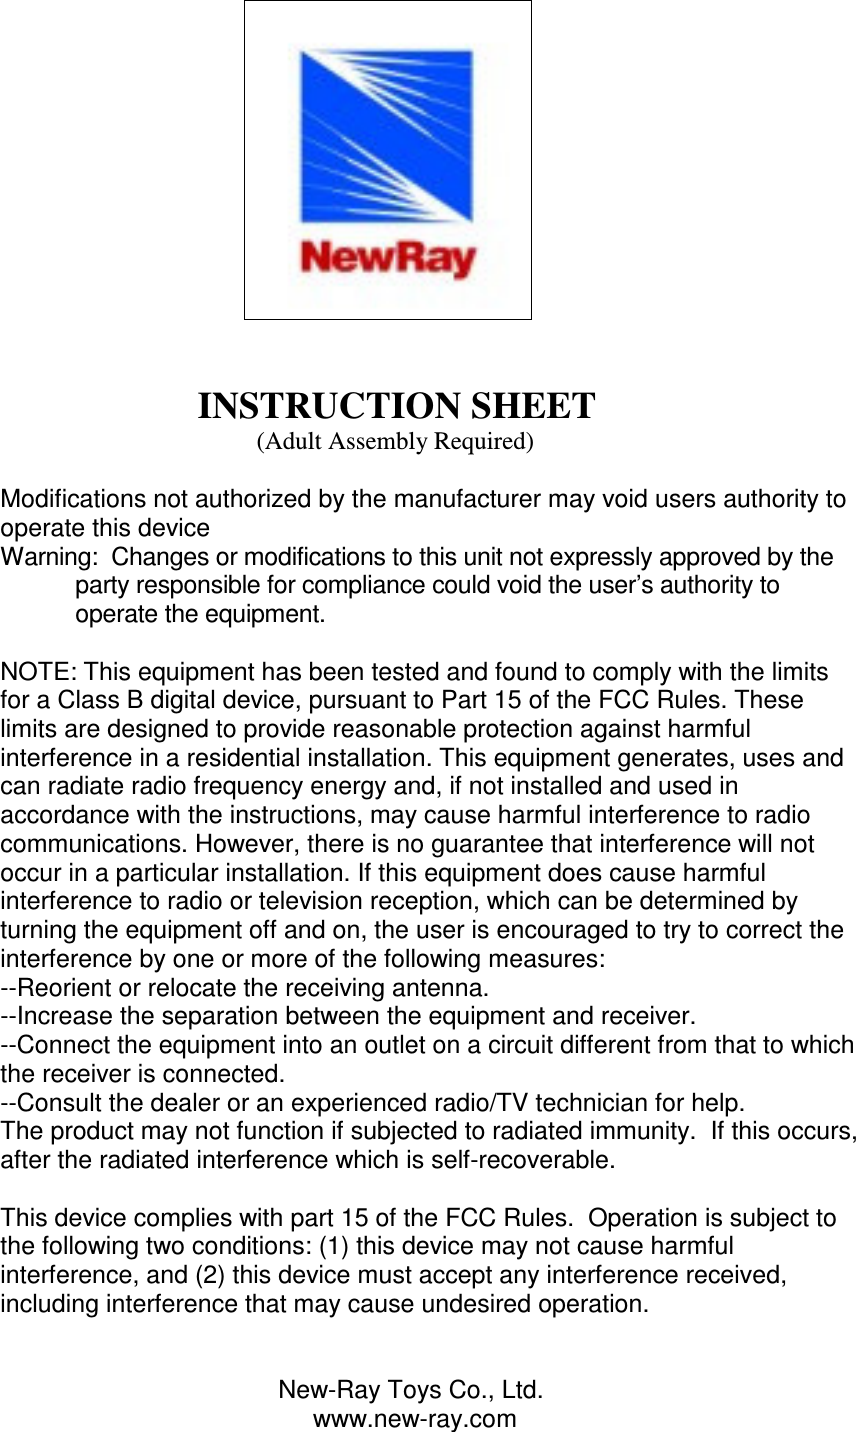                                                                                                                         INSTRUCTION SHEET                                          (Adult Assembly Required)  Modifications not authorized by the manufacturer may void users authority to operate this device Warning:  Changes or modifications to this unit not expressly approved by the party responsible for compliance could void the user’s authority to operate the equipment.  NOTE: This equipment has been tested and found to comply with the limits for a Class B digital device, pursuant to Part 15 of the FCC Rules. These limits are designed to provide reasonable protection against harmful interference in a residential installation. This equipment generates, uses and can radiate radio frequency energy and, if not installed and used in accordance with the instructions, may cause harmful interference to radio communications. However, there is no guarantee that interference will not occur in a particular installation. If this equipment does cause harmful interference to radio or television reception, which can be determined by turning the equipment off and on, the user is encouraged to try to correct the interference by one or more of the following measures: --Reorient or relocate the receiving antenna. --Increase the separation between the equipment and receiver. --Connect the equipment into an outlet on a circuit different from that to which the receiver is connected. --Consult the dealer or an experienced radio/TV technician for help. The product may not function if subjected to radiated immunity.  If this occurs, after the radiated interference which is self-recoverable.  This device complies with part 15 of the FCC Rules.  Operation is subject to the following two conditions: (1) this device may not cause harmful interference, and (2) this device must accept any interference received, including interference that may cause undesired operation.                                           New-Ray Toys Co., Ltd.                                              www.new-ray.com 